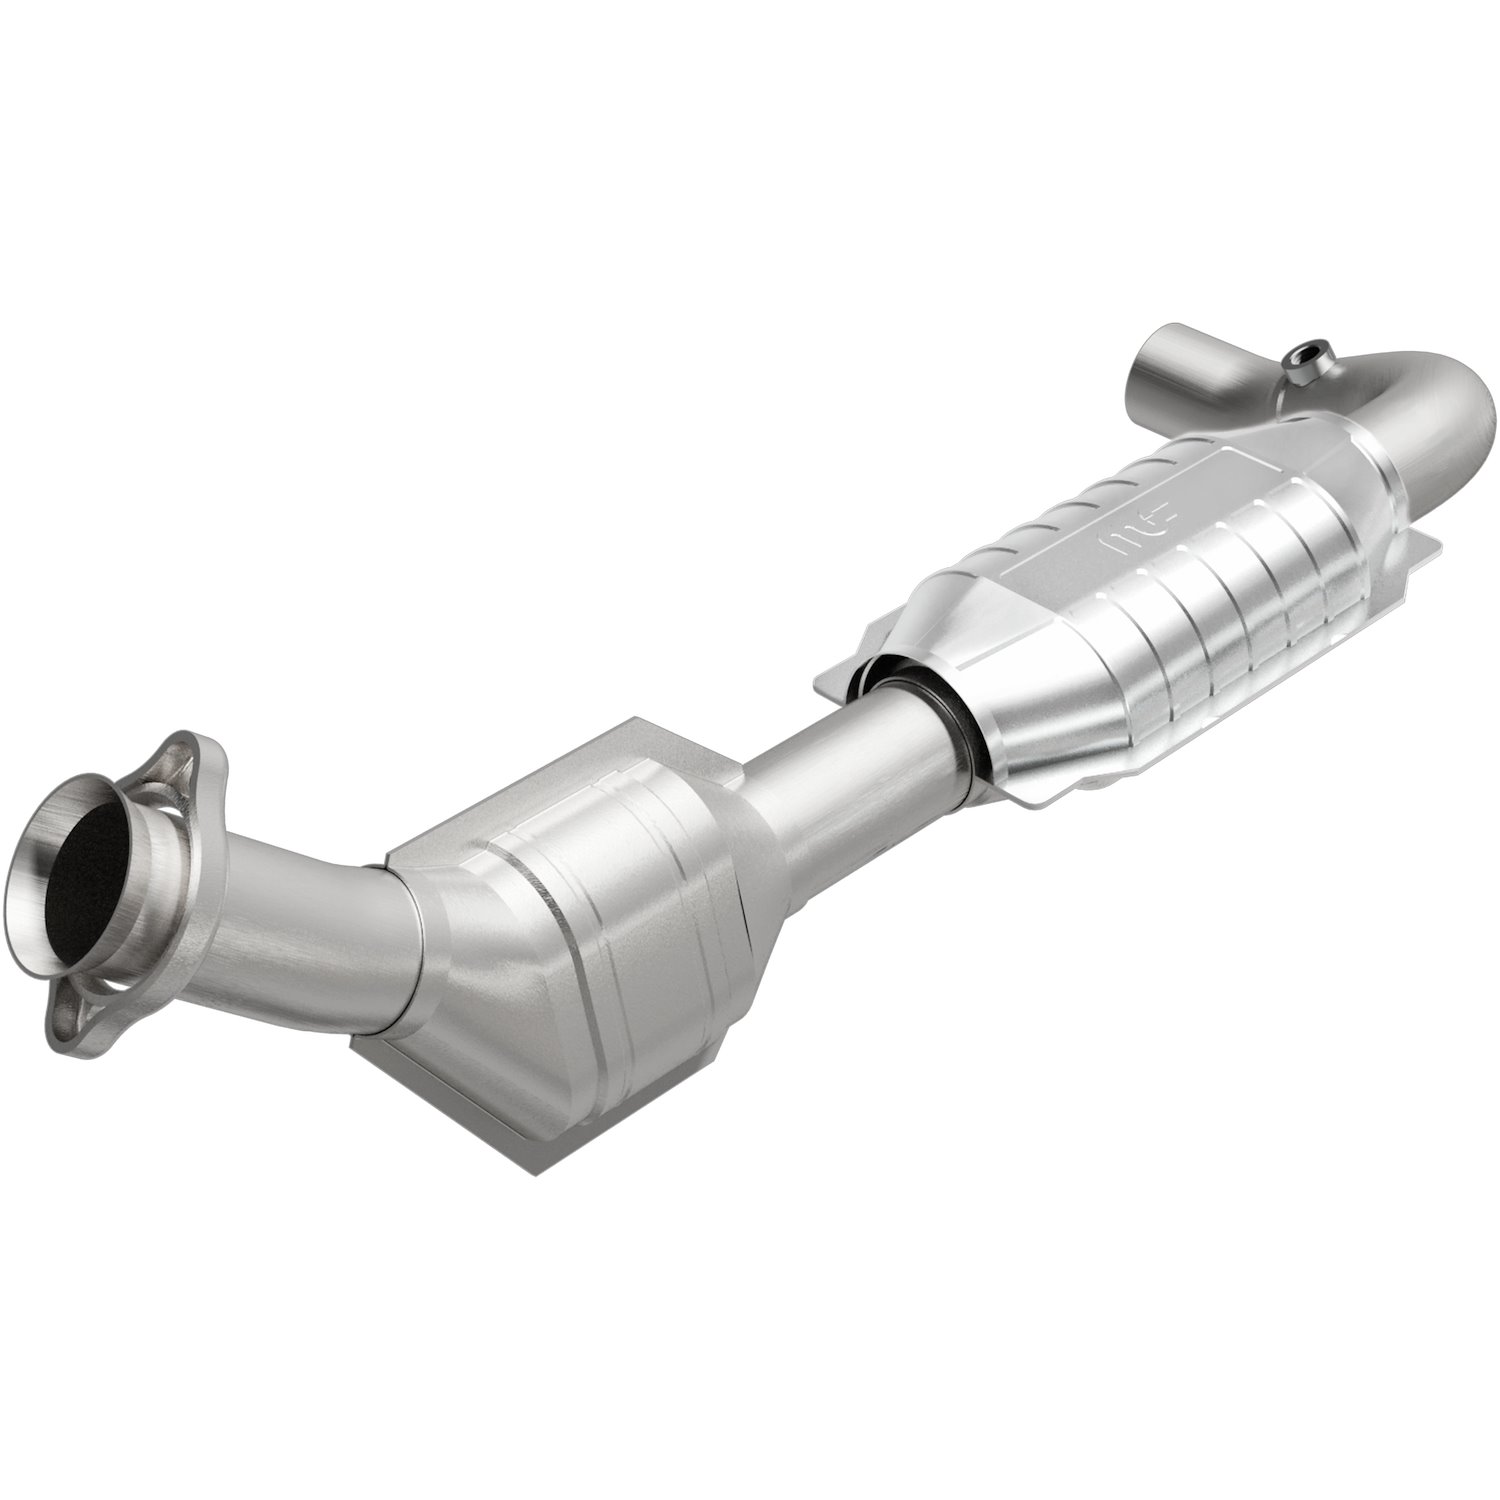 HM Grade Federal / EPA Compliant Direct-Fit Catalytic Converter 93325